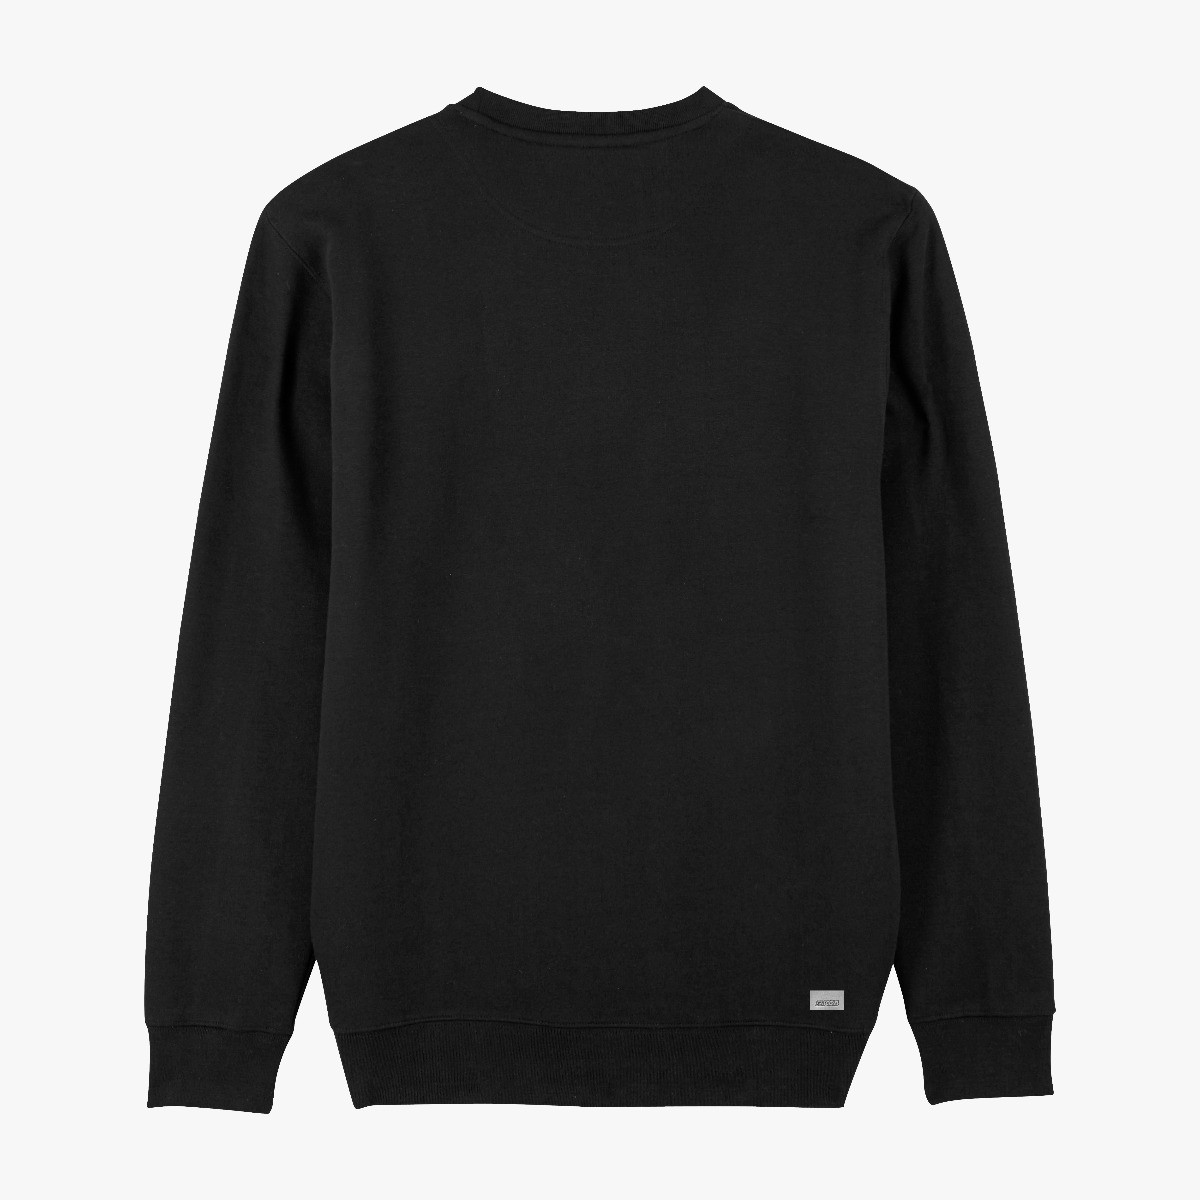 SPACE AGENCY CREW SWEATER 12